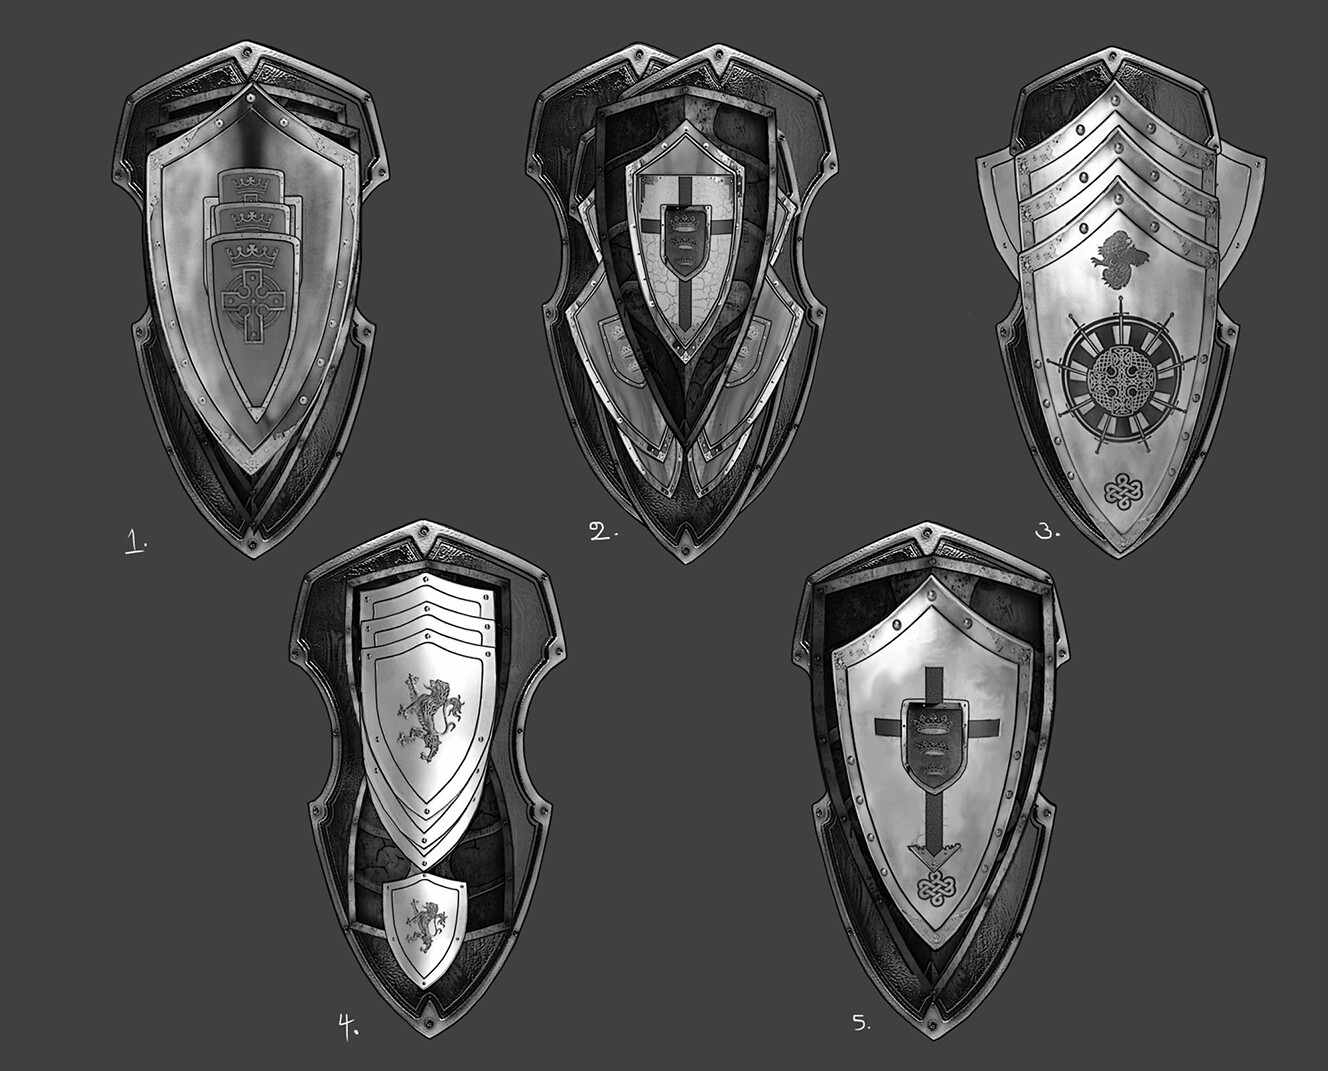 Shield concept variations photobashed and painted over to blend.